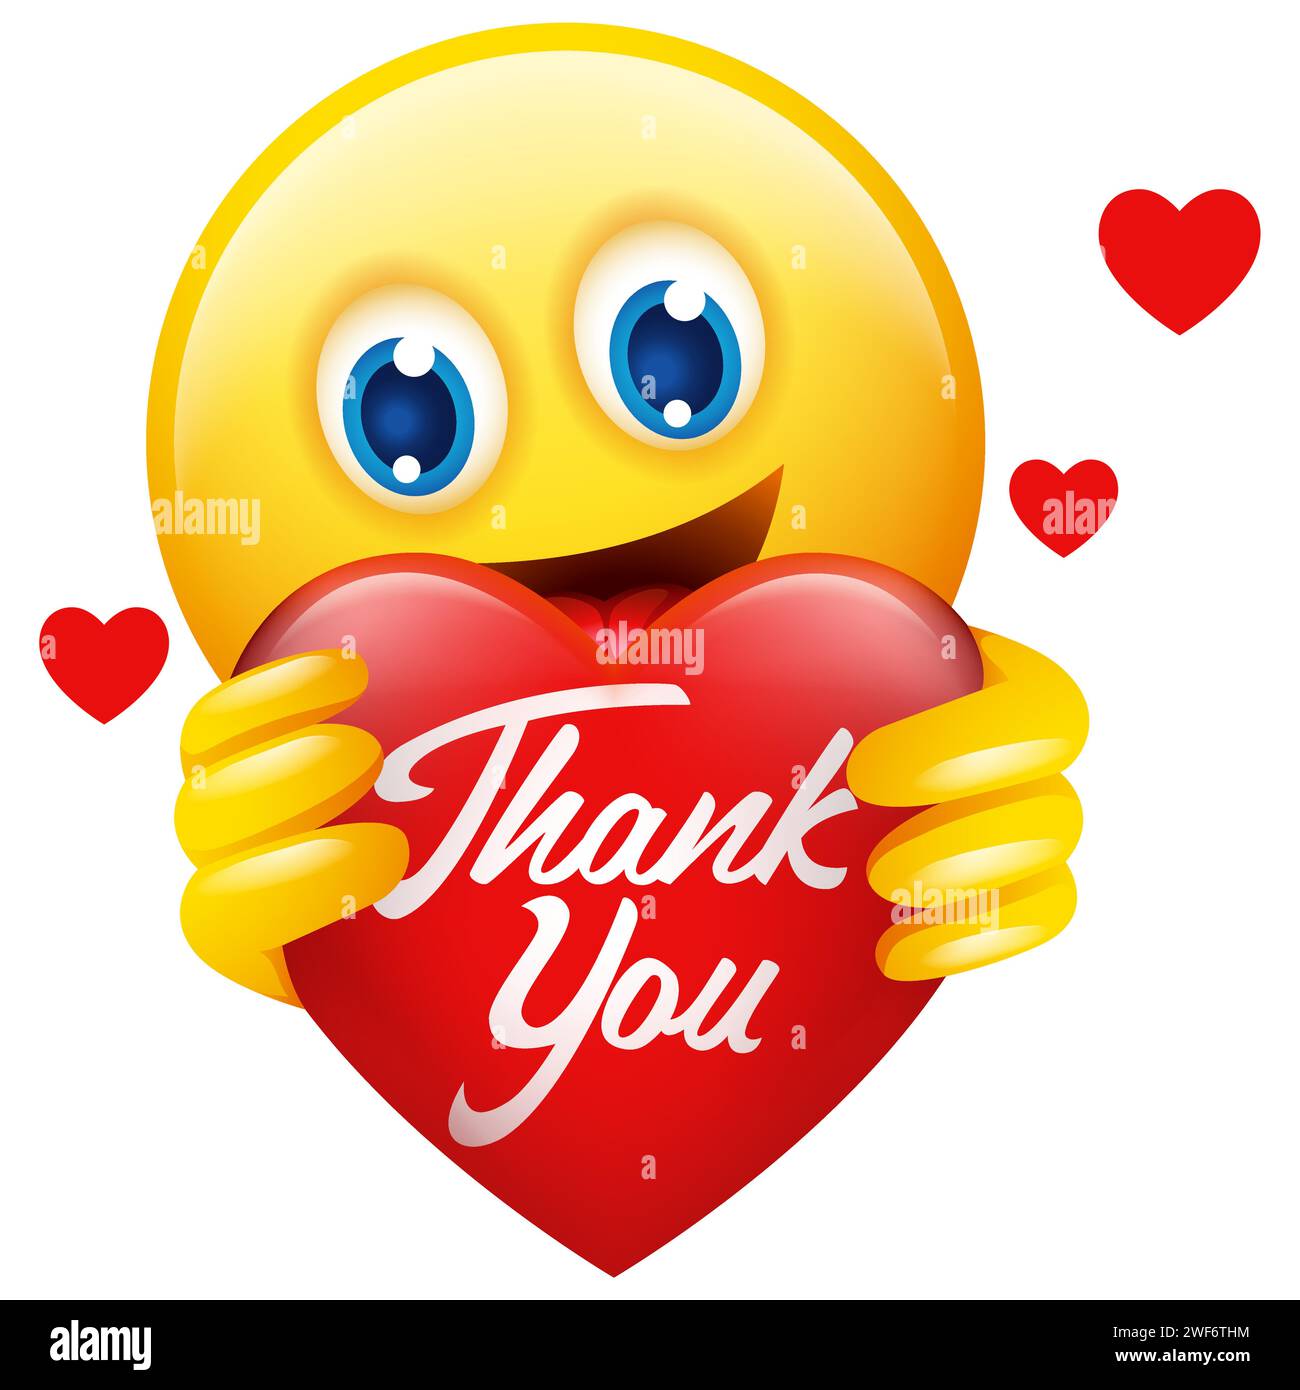 Vector illustration of emoticon holding heart symbol with Thank You message Stock Vector